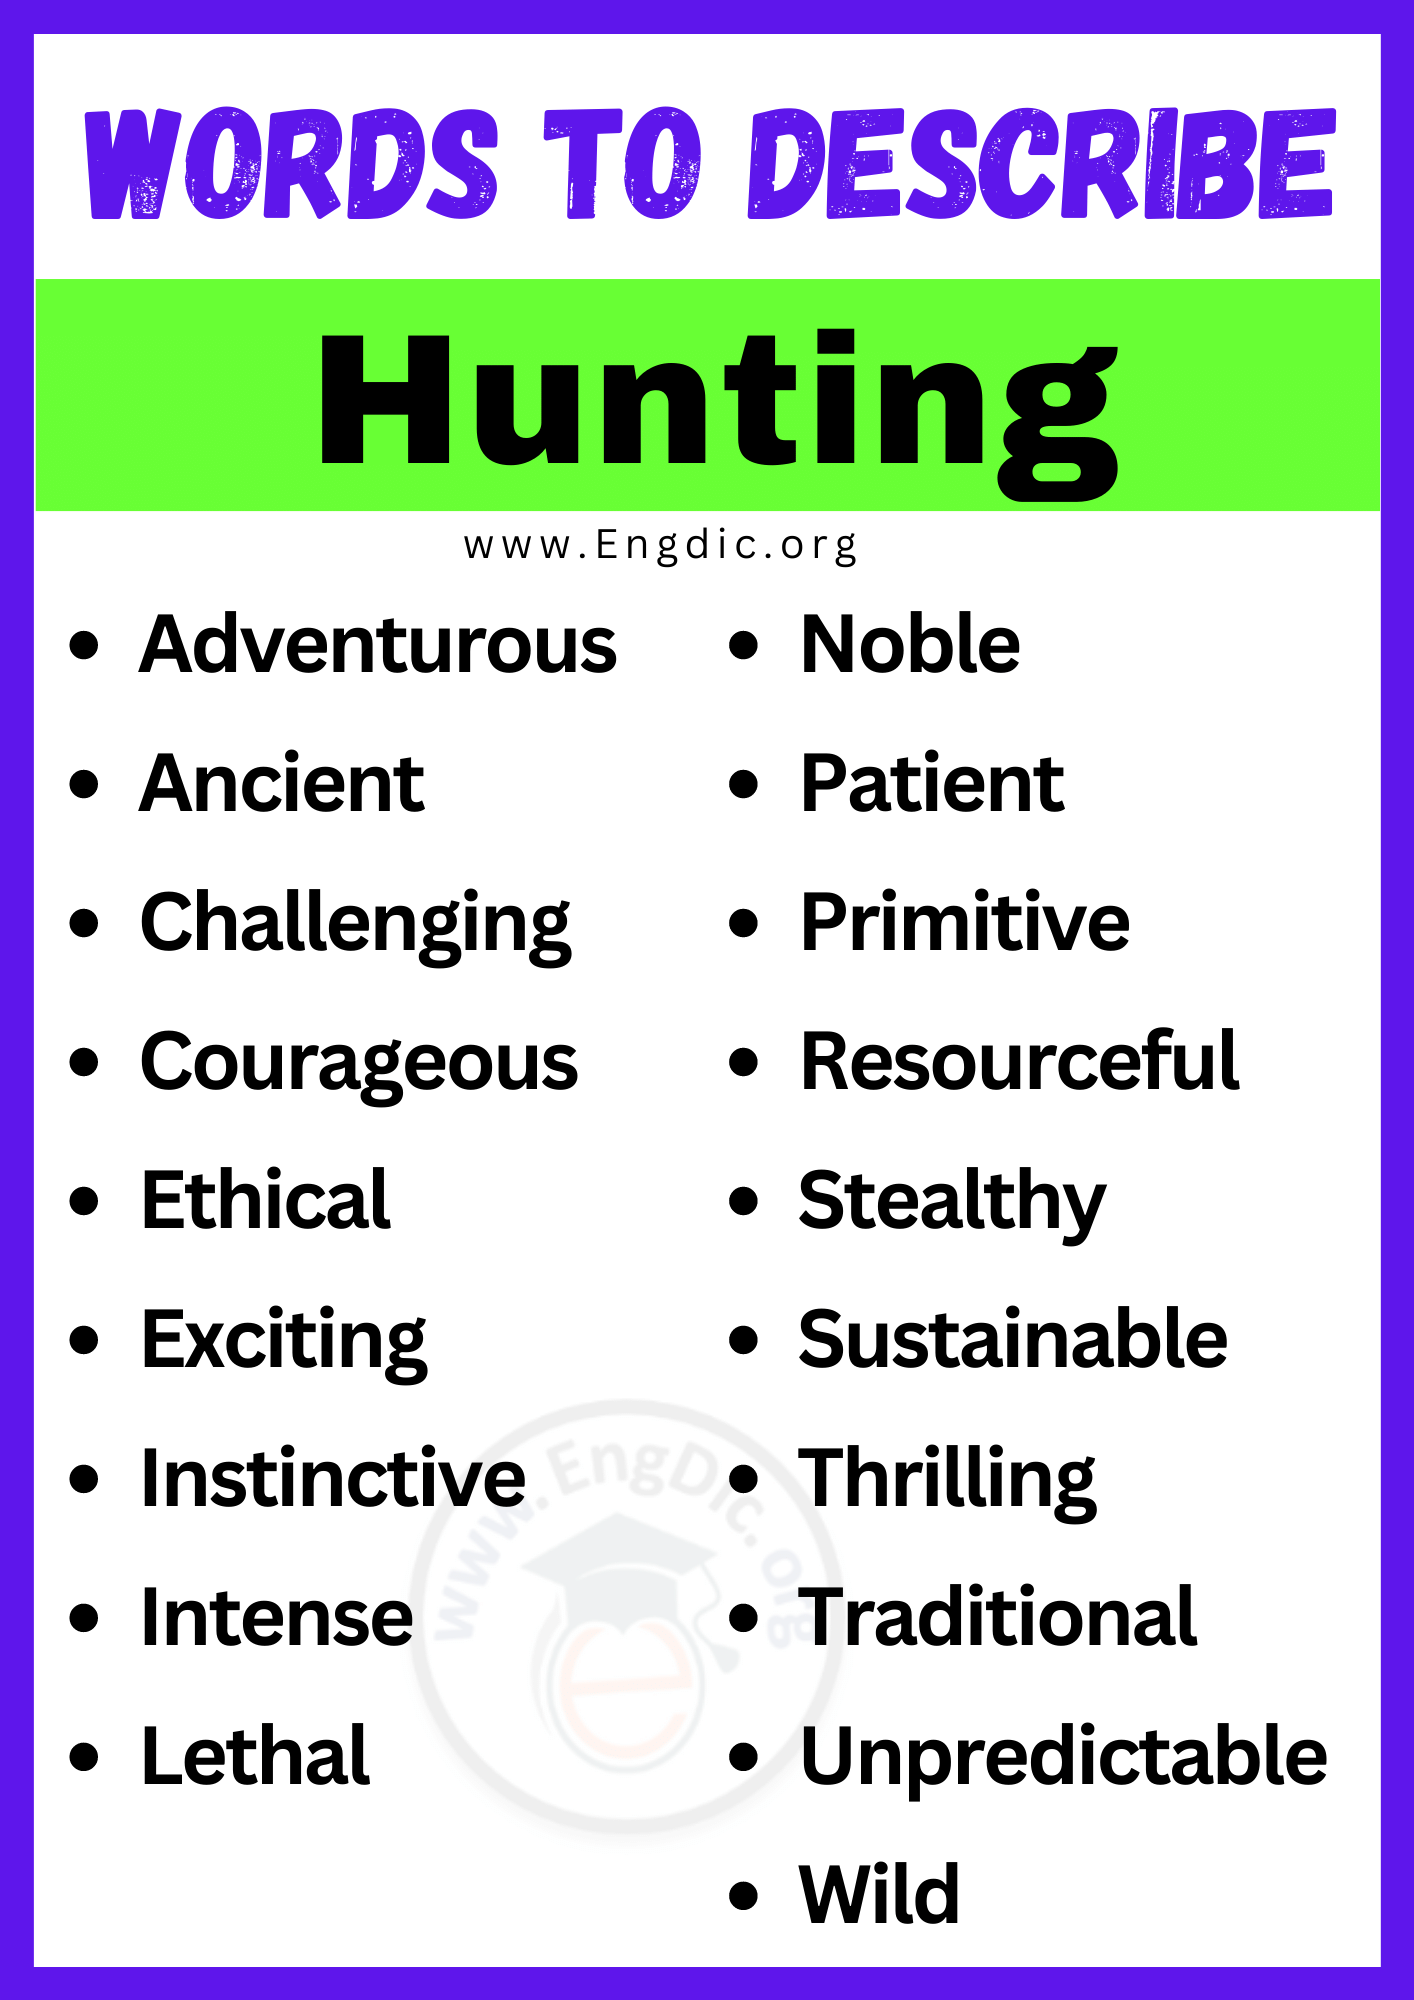 Words to Describe Hunting